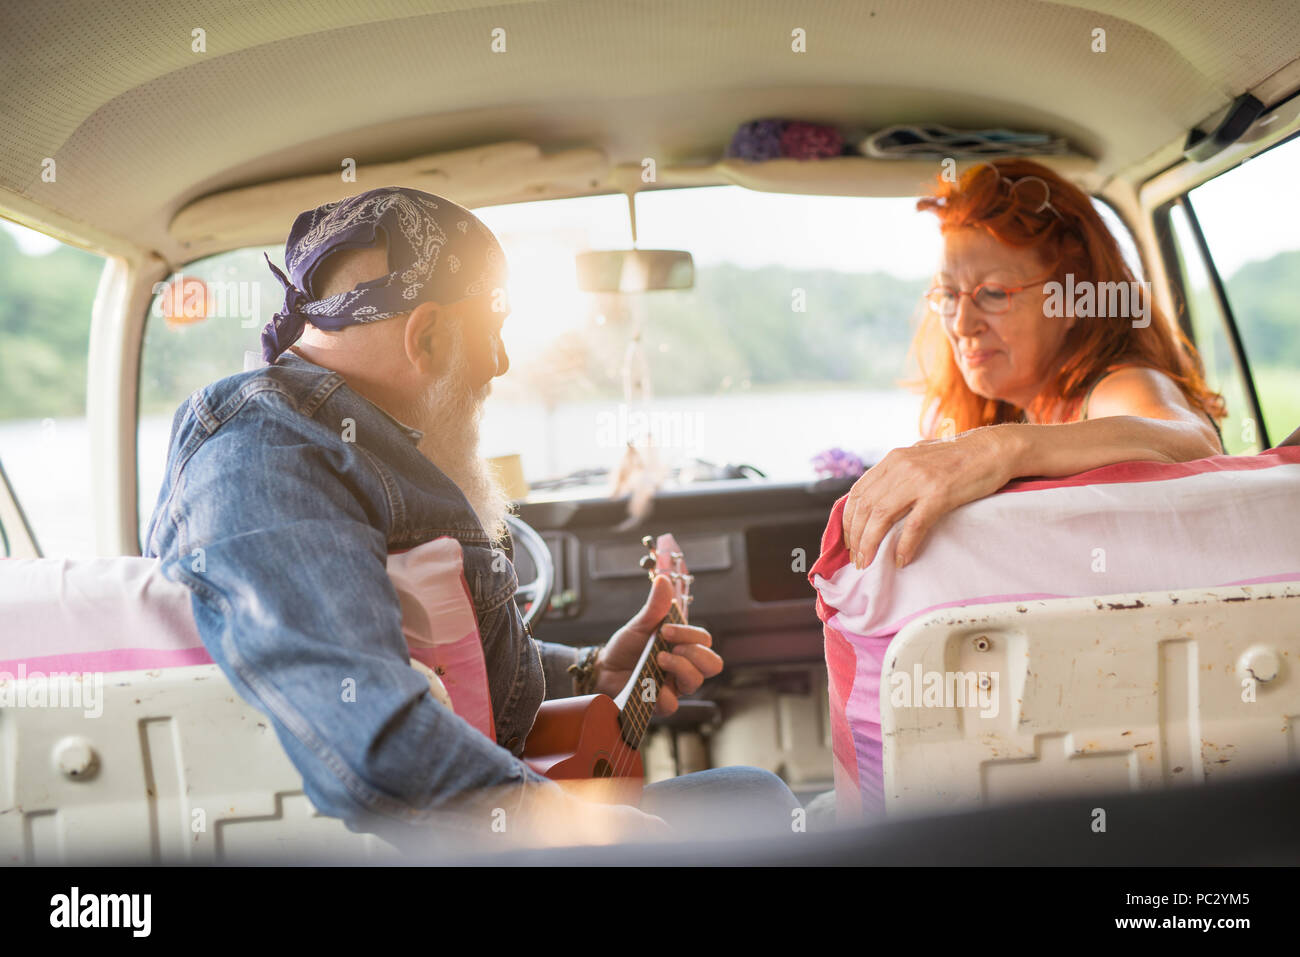 An old hipster couple sitting in a van, the man playing ukulele  Stock Photo